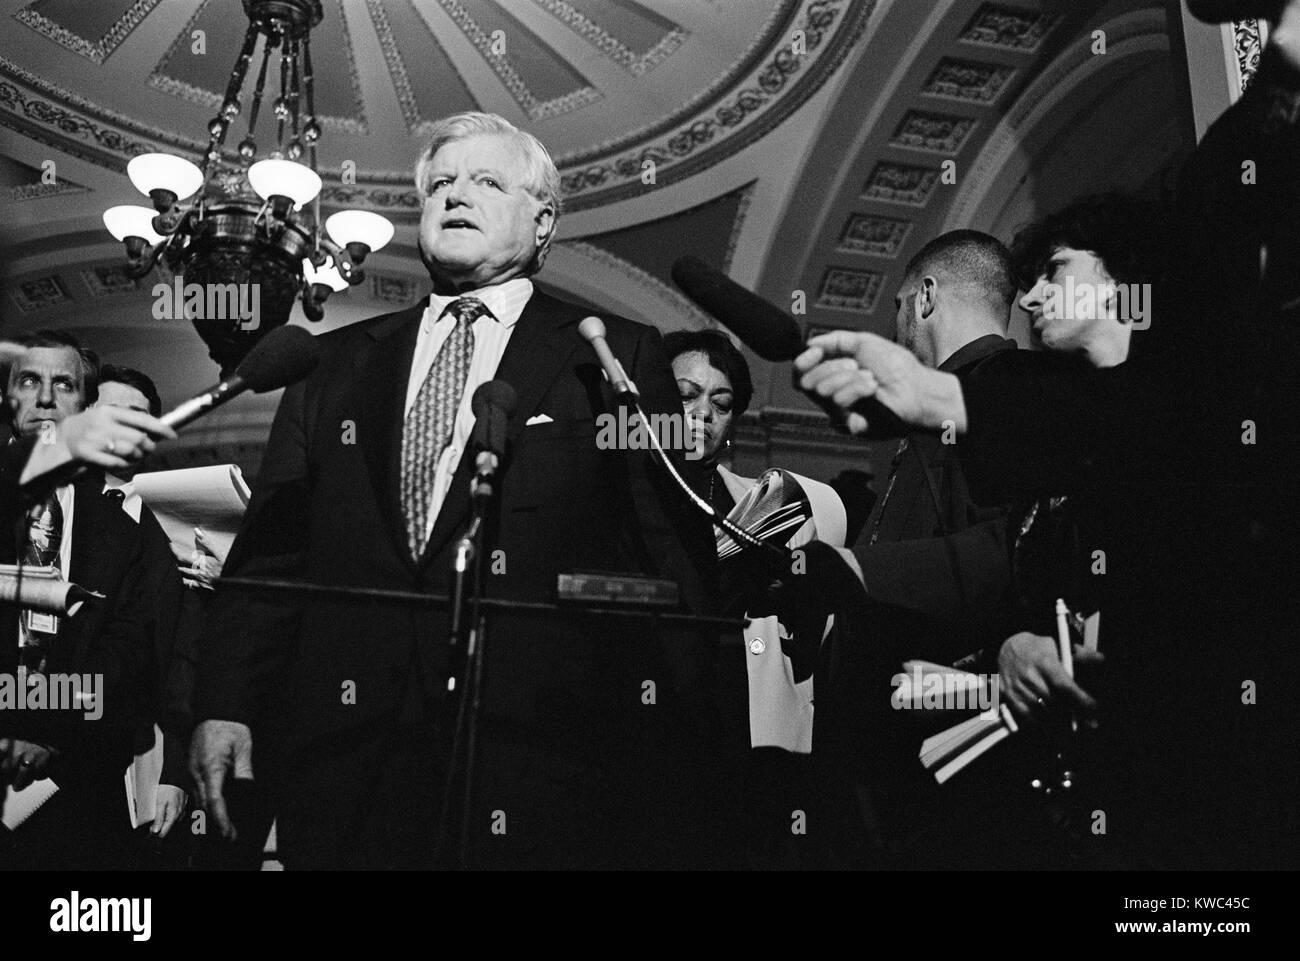 Senator Ted Kennedy speaks to reporters in the U.S. Capitol during Clinton Impeachment Trial. The trial started on Jan. 7, 1999, and ended with Clinton Acquittal on Feb. 12. (BSLOC 2015 14 86) Stock Photo